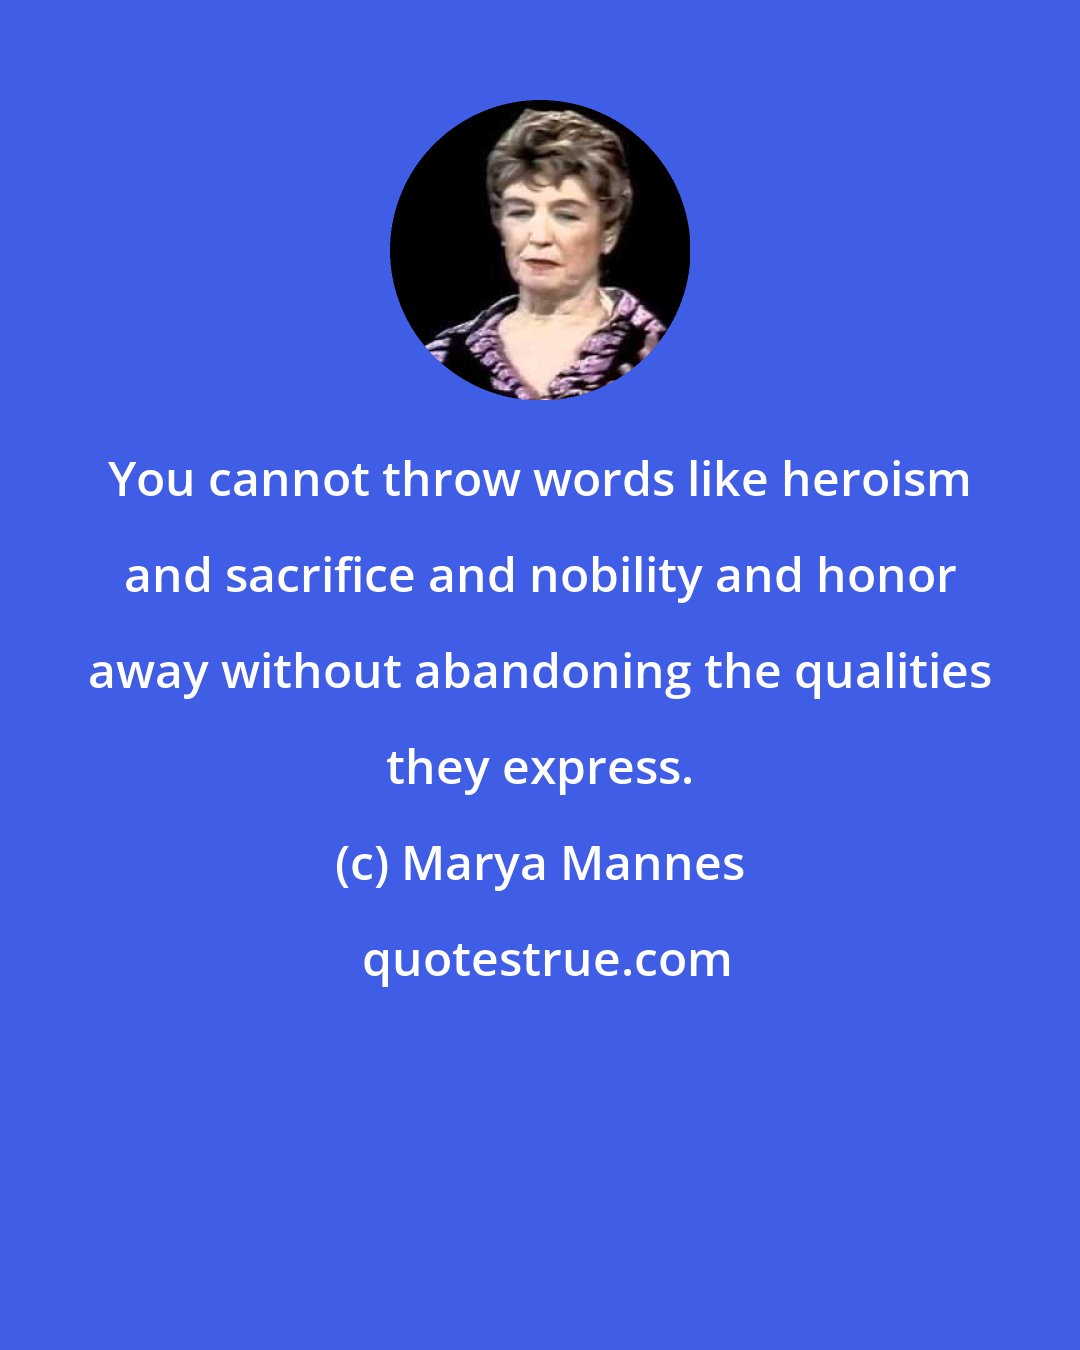 Marya Mannes: You cannot throw words like heroism and sacrifice and nobility and honor away without abandoning the qualities they express.